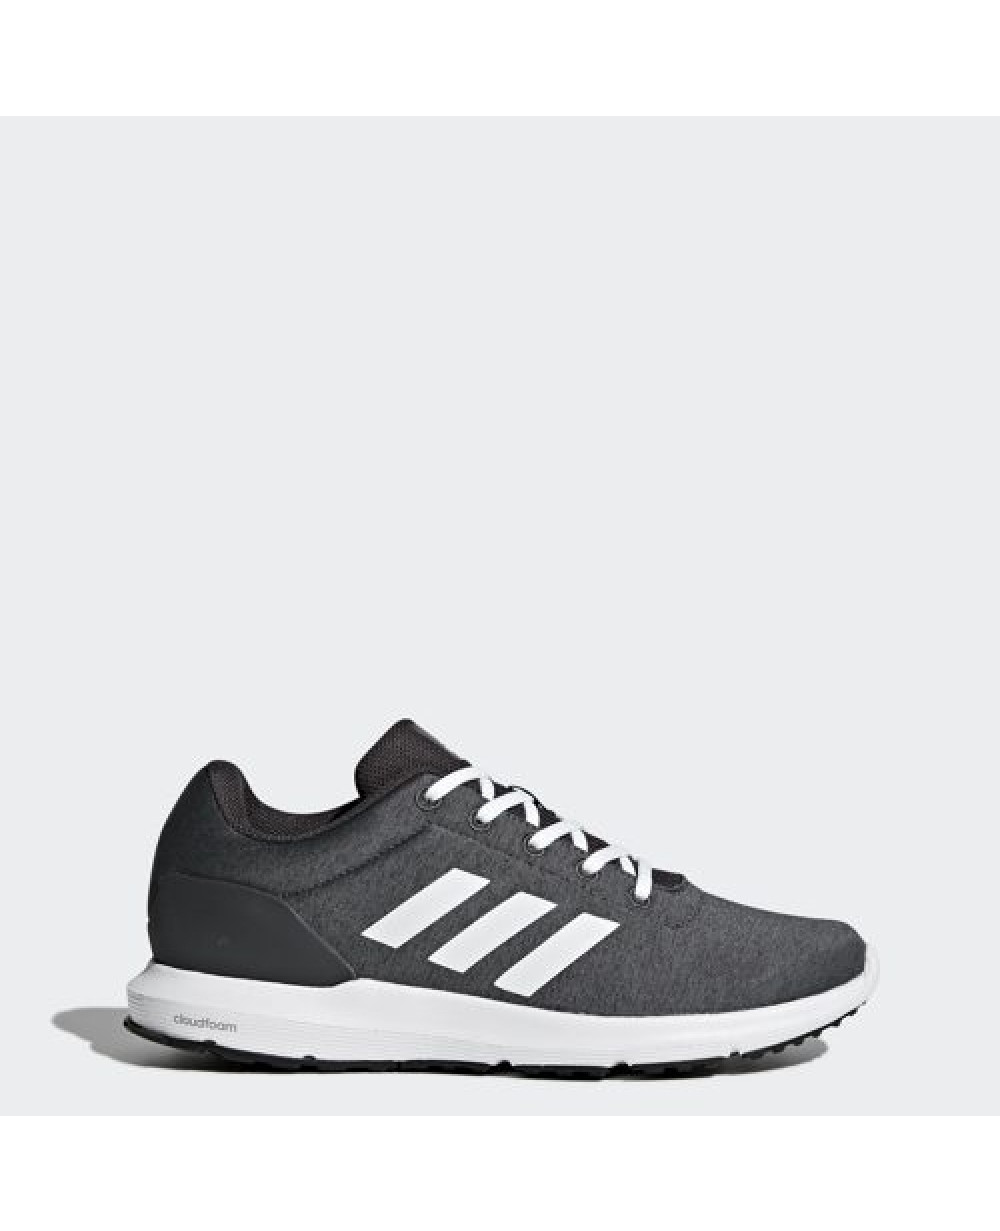 Adidas Cosmic 1.1 Training and Running Shoes For Women BB3347